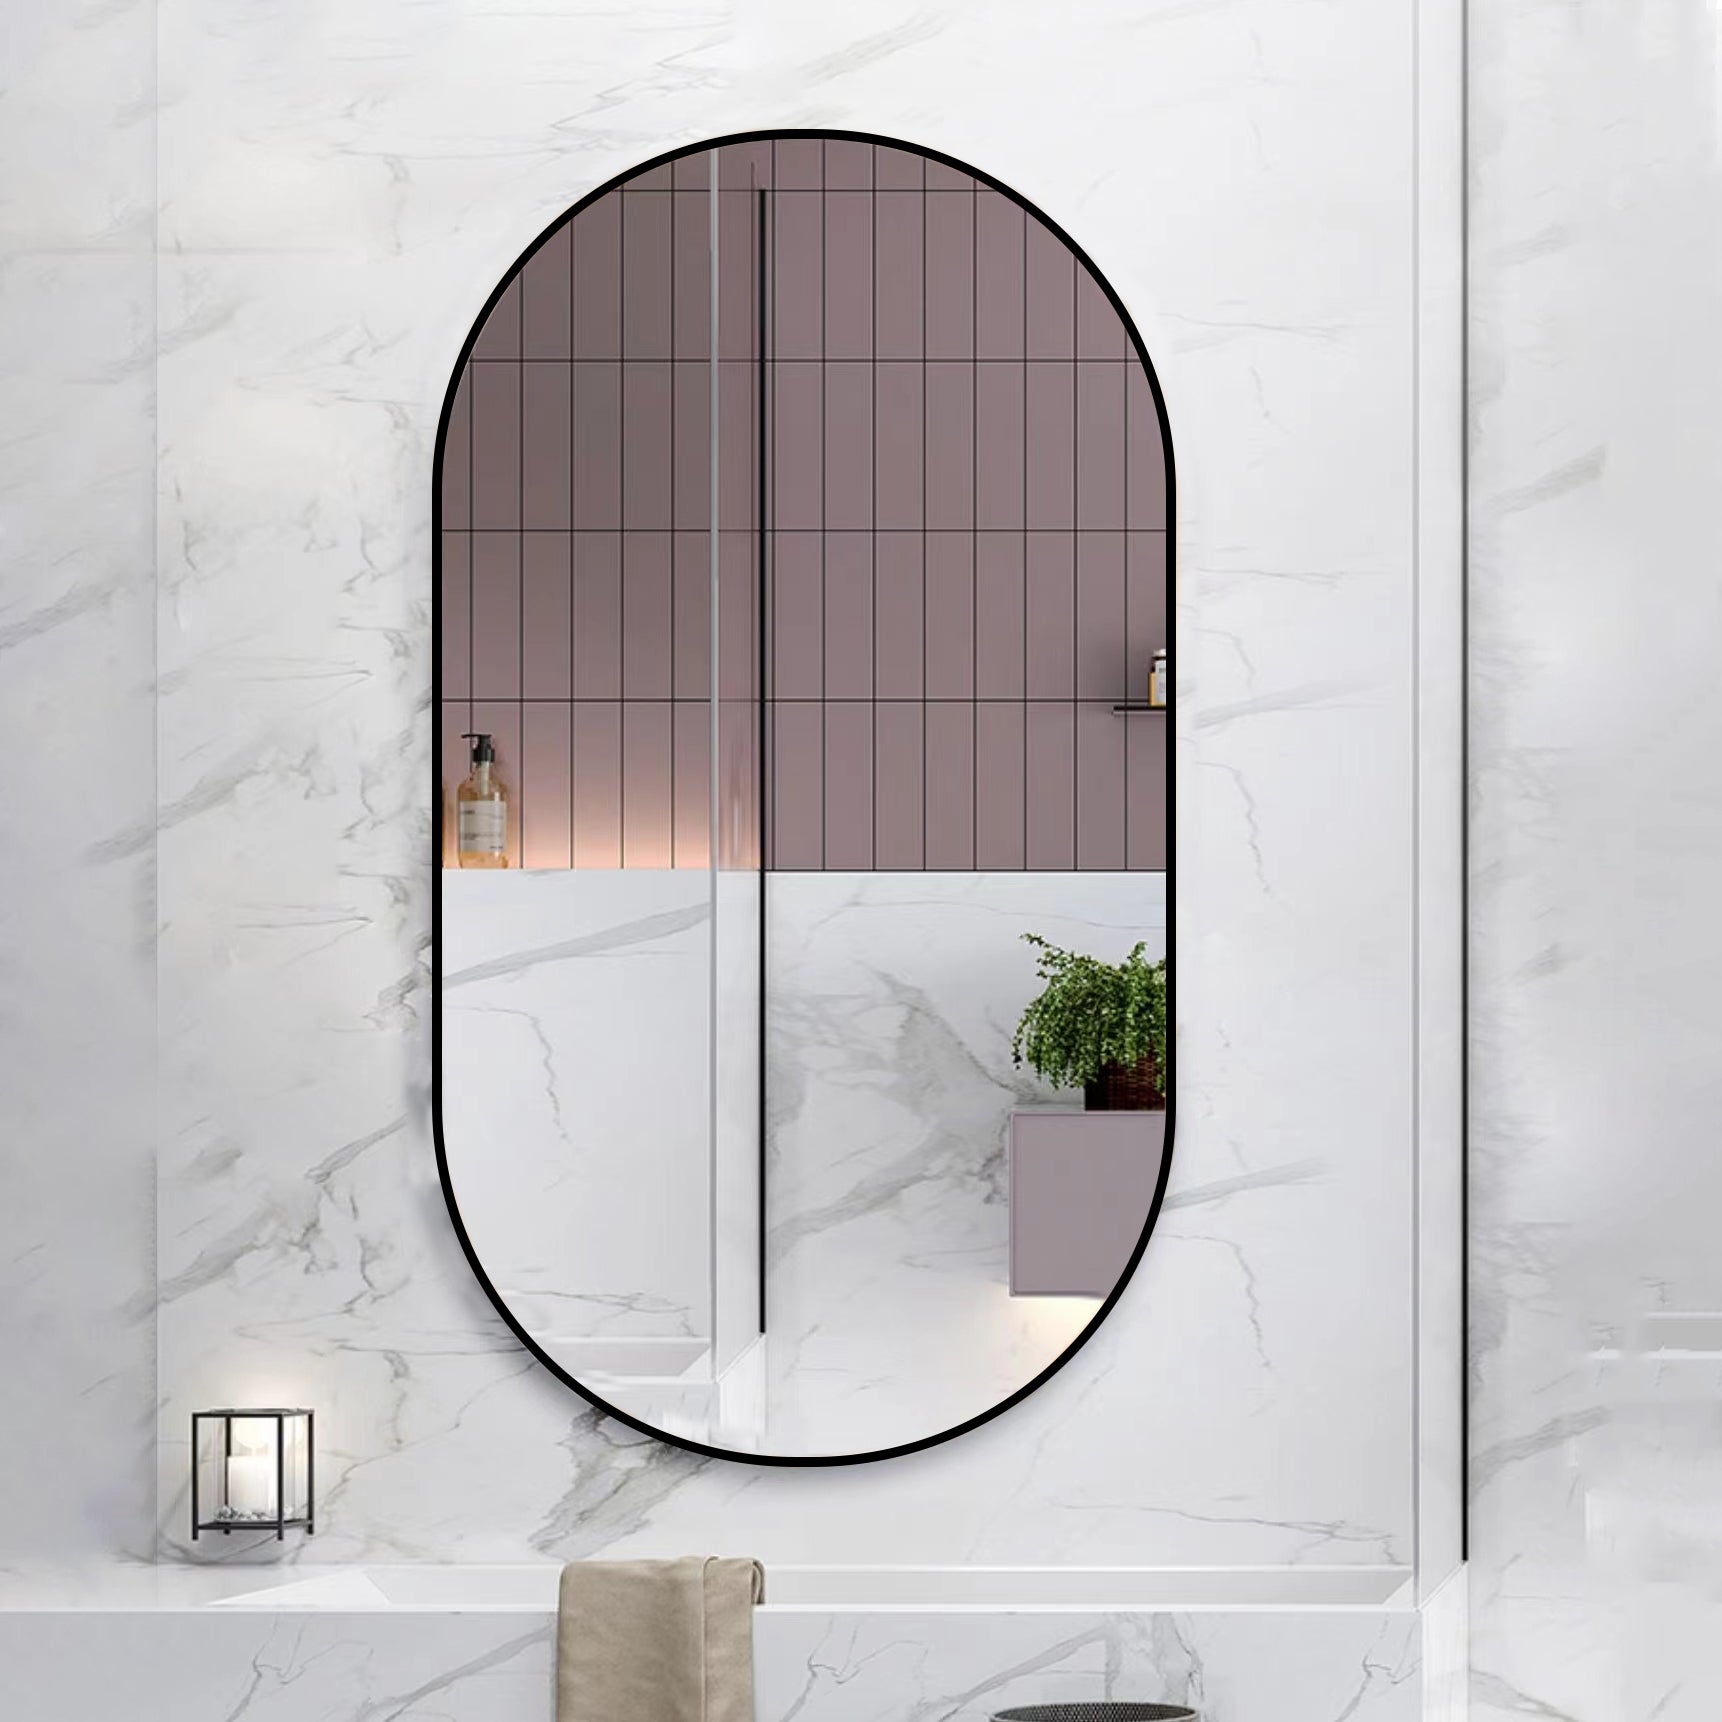 MAICOSY Oval Wall Mounted Mirror Black Metal Vanity Mirrors Hanging 36"x18"